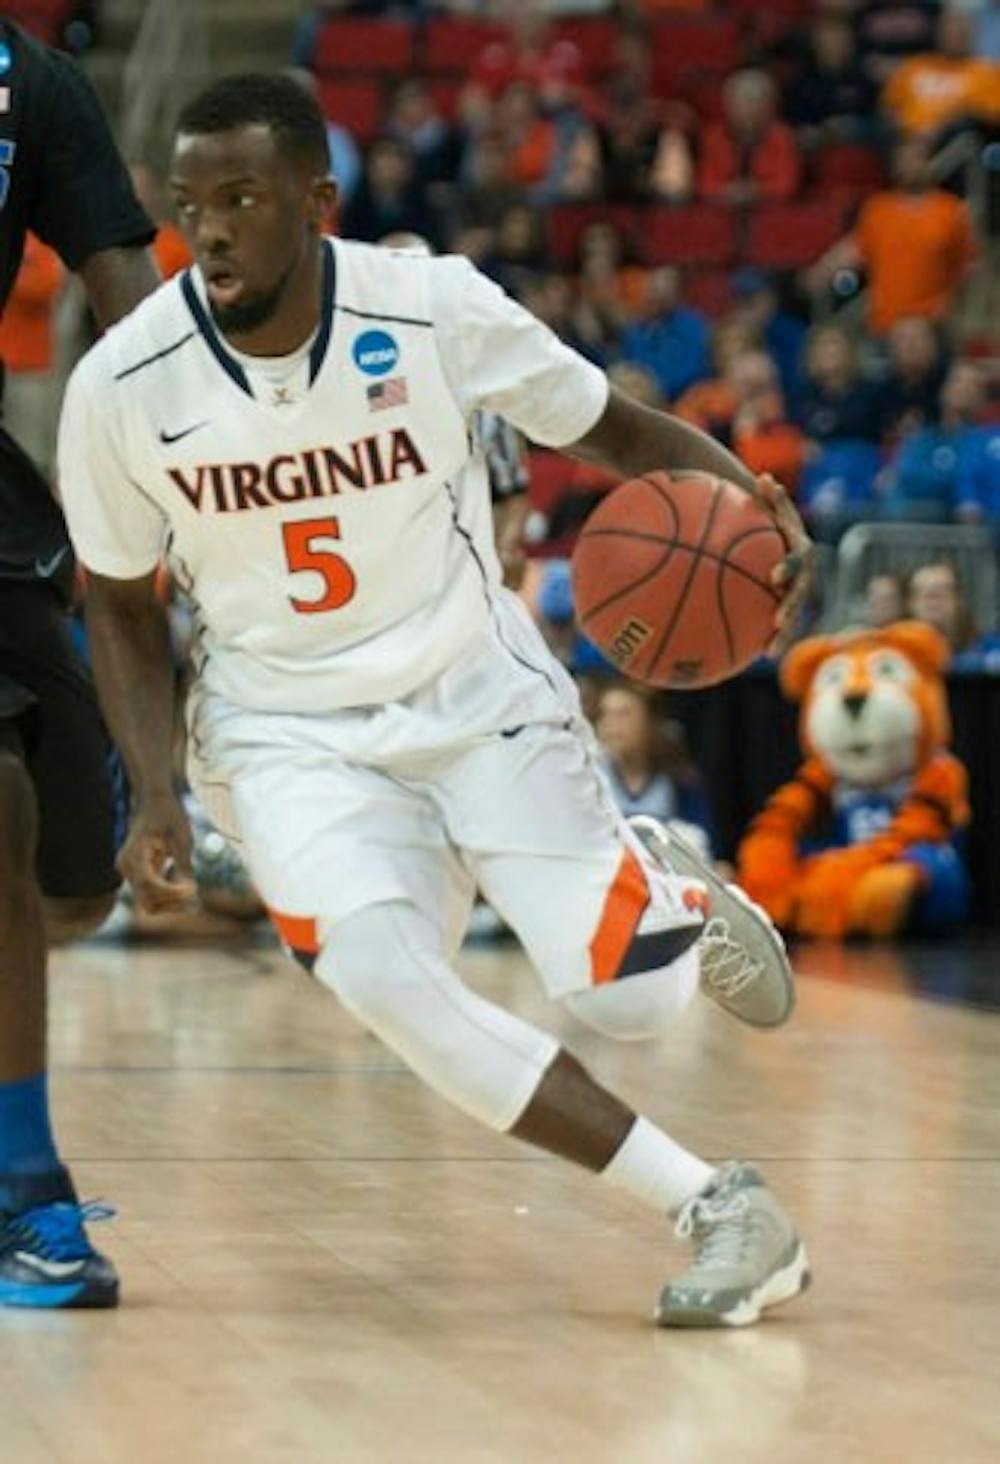 <p>Teven Jones played three seasons for Virginia, redshirting the first. He plans to play professionally in Germany or Italy after one last collegiate campaign, this one at Union College in Kentucky. </p>